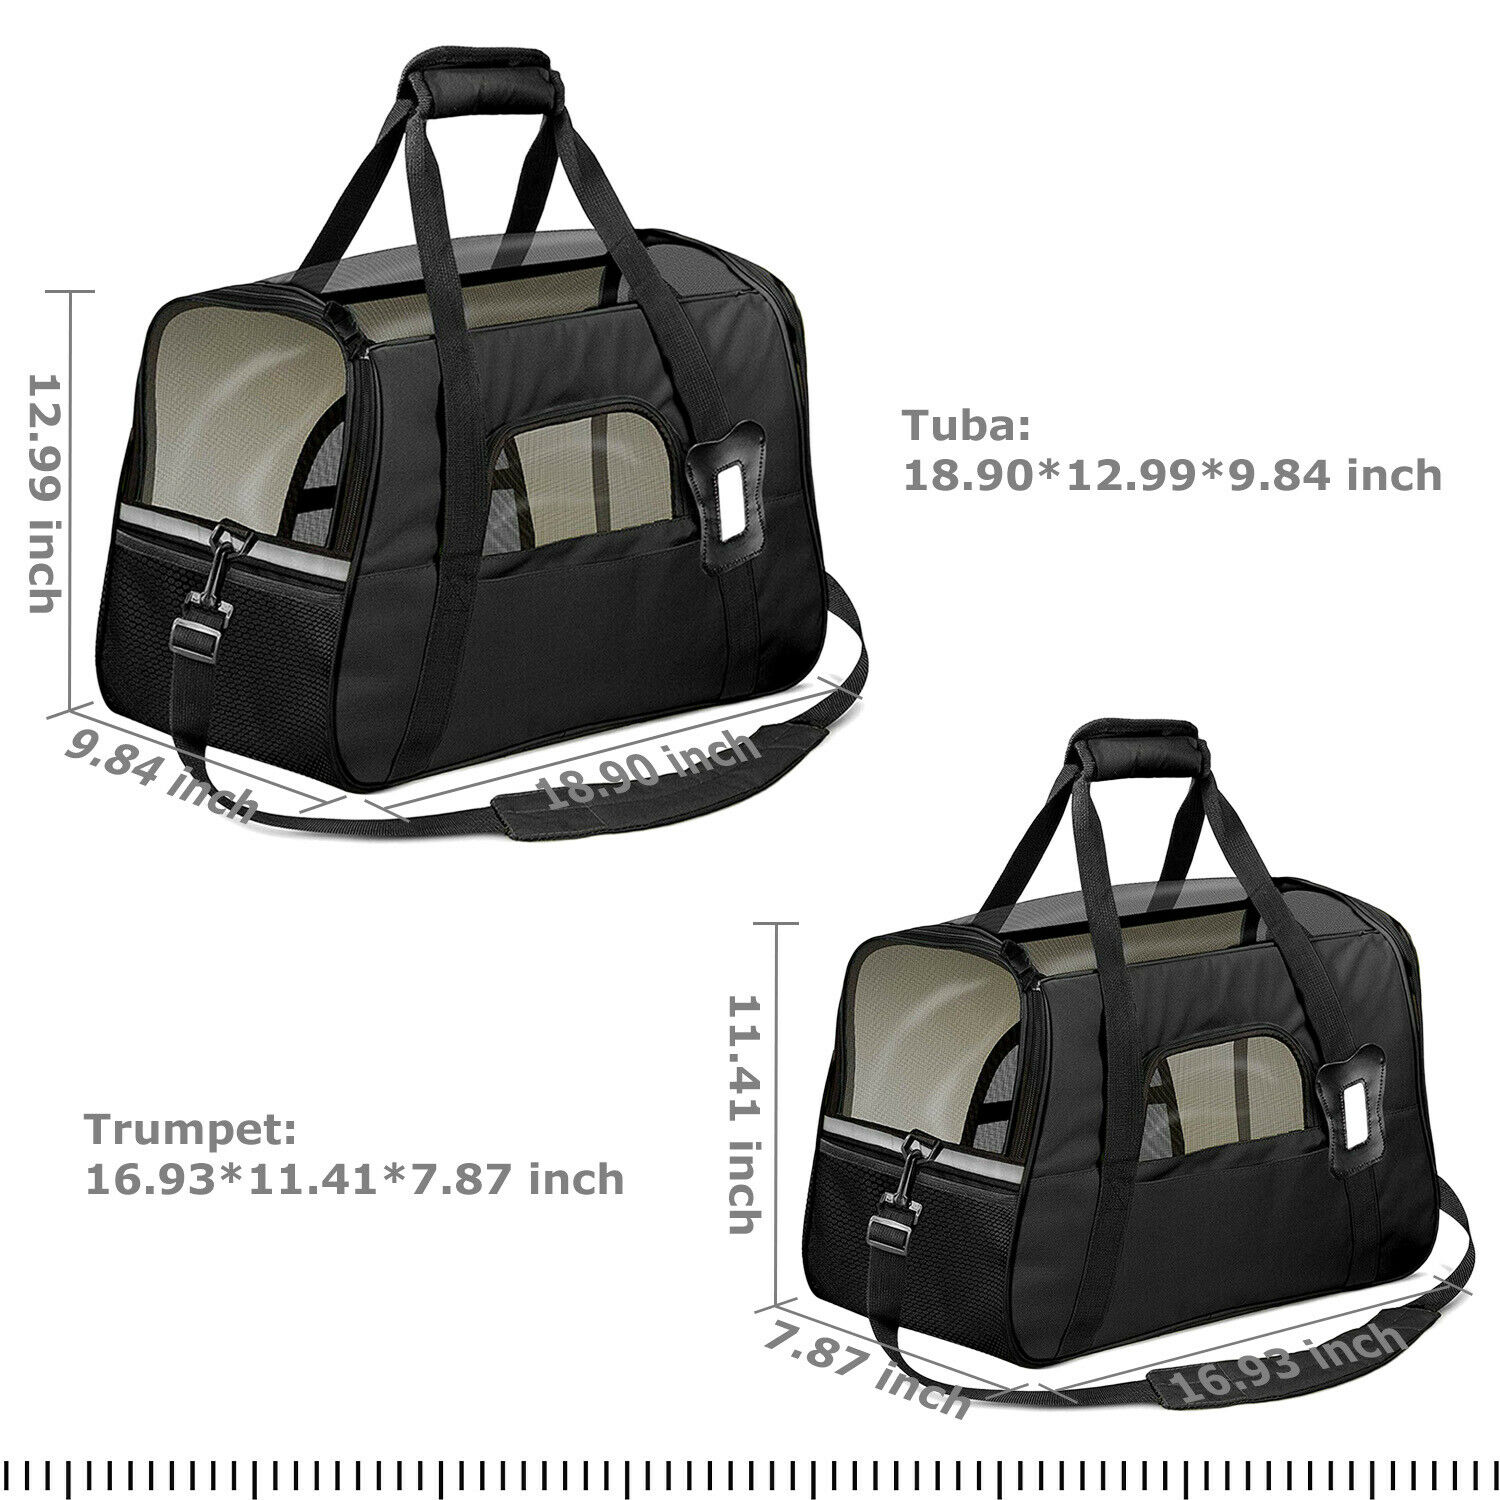 Image 91 - Pet Dog /Small Cat Carrier Soft Sided Comfort Bag Travel Case Airline Approved